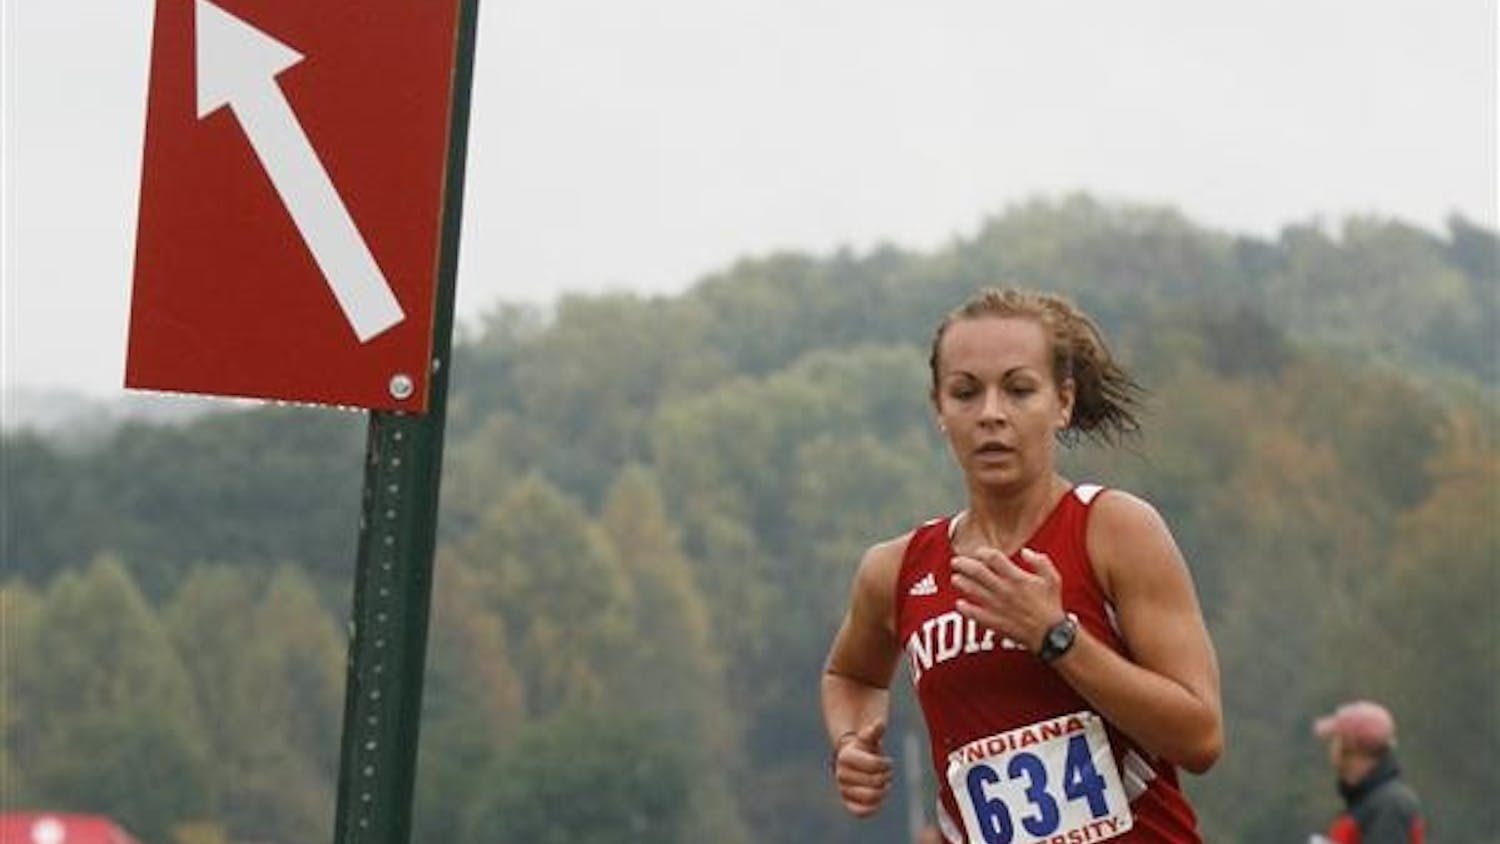 Indiana Open Cross Country